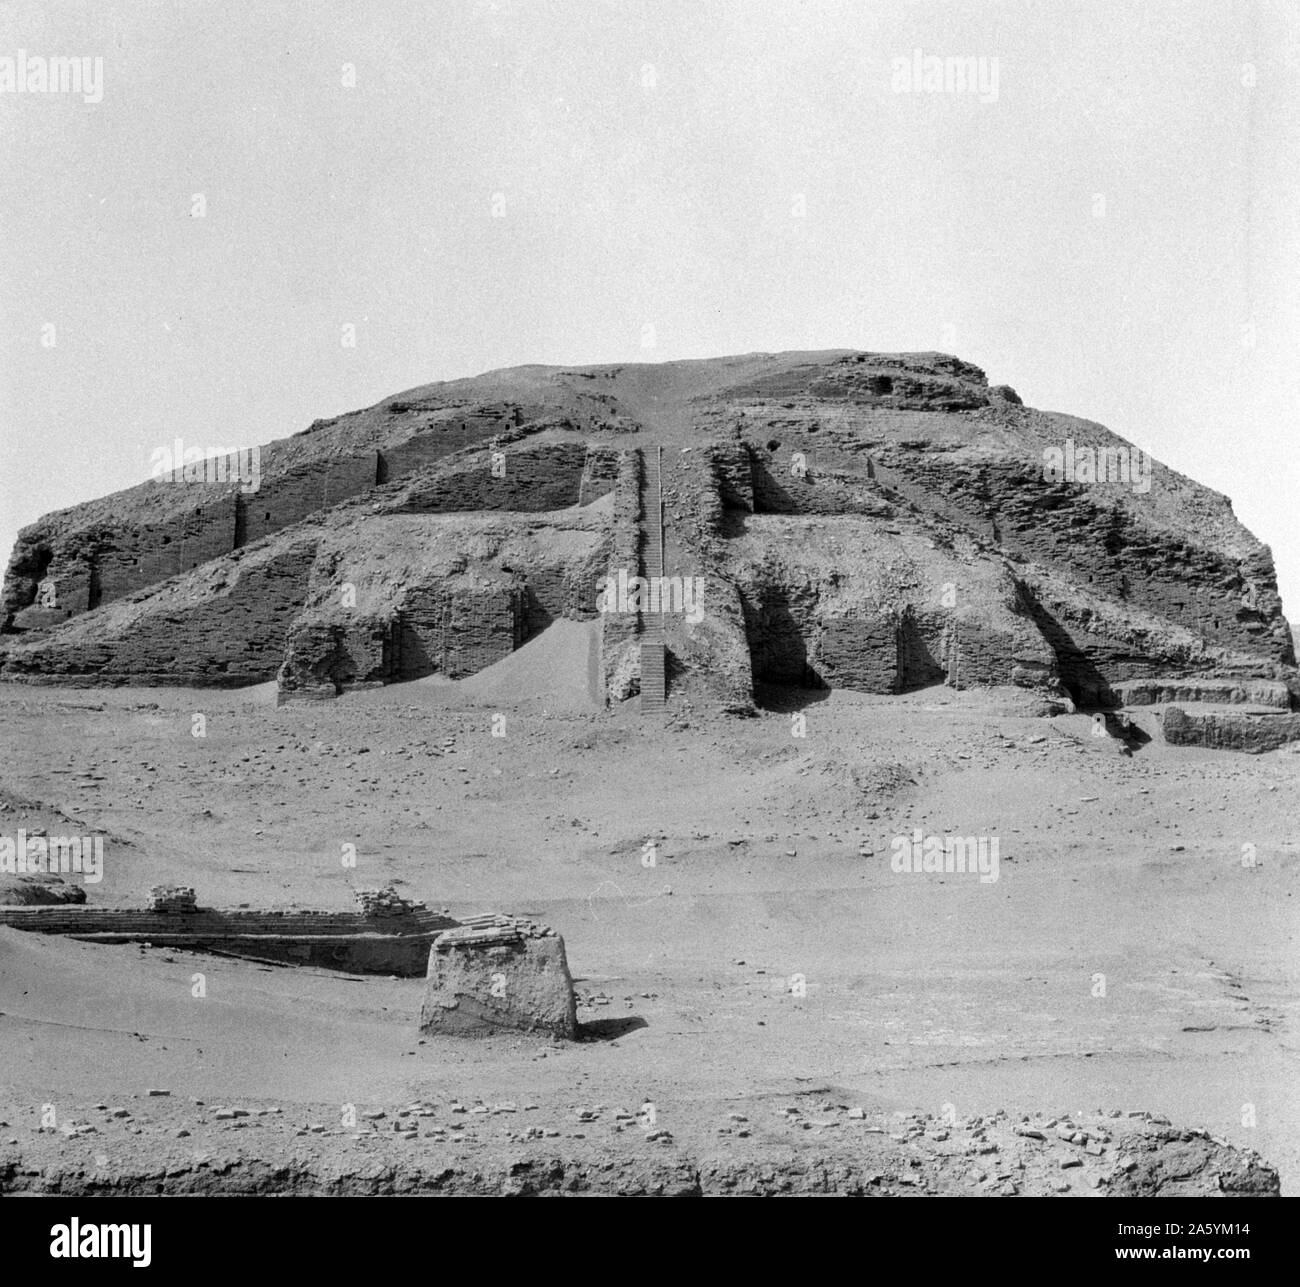 The Great Ziggurat of Ur, near Nasiriya, Iraq. Ziggurats were built by the Sumerians, Babylonians, Elamites, Acadians, and Assyrians for local religions. Each ziggurat was part of a temple complex which included other buildings. The precursors of the ziggurat were raised platforms that date from the Ubaid period[1] during the fourth millennium BC. The earliest ziggurats began near the end of the Early Dynastic Period.[2] The latest Mesopotamian ziggurats date from the 6th century BC. Stock Photo